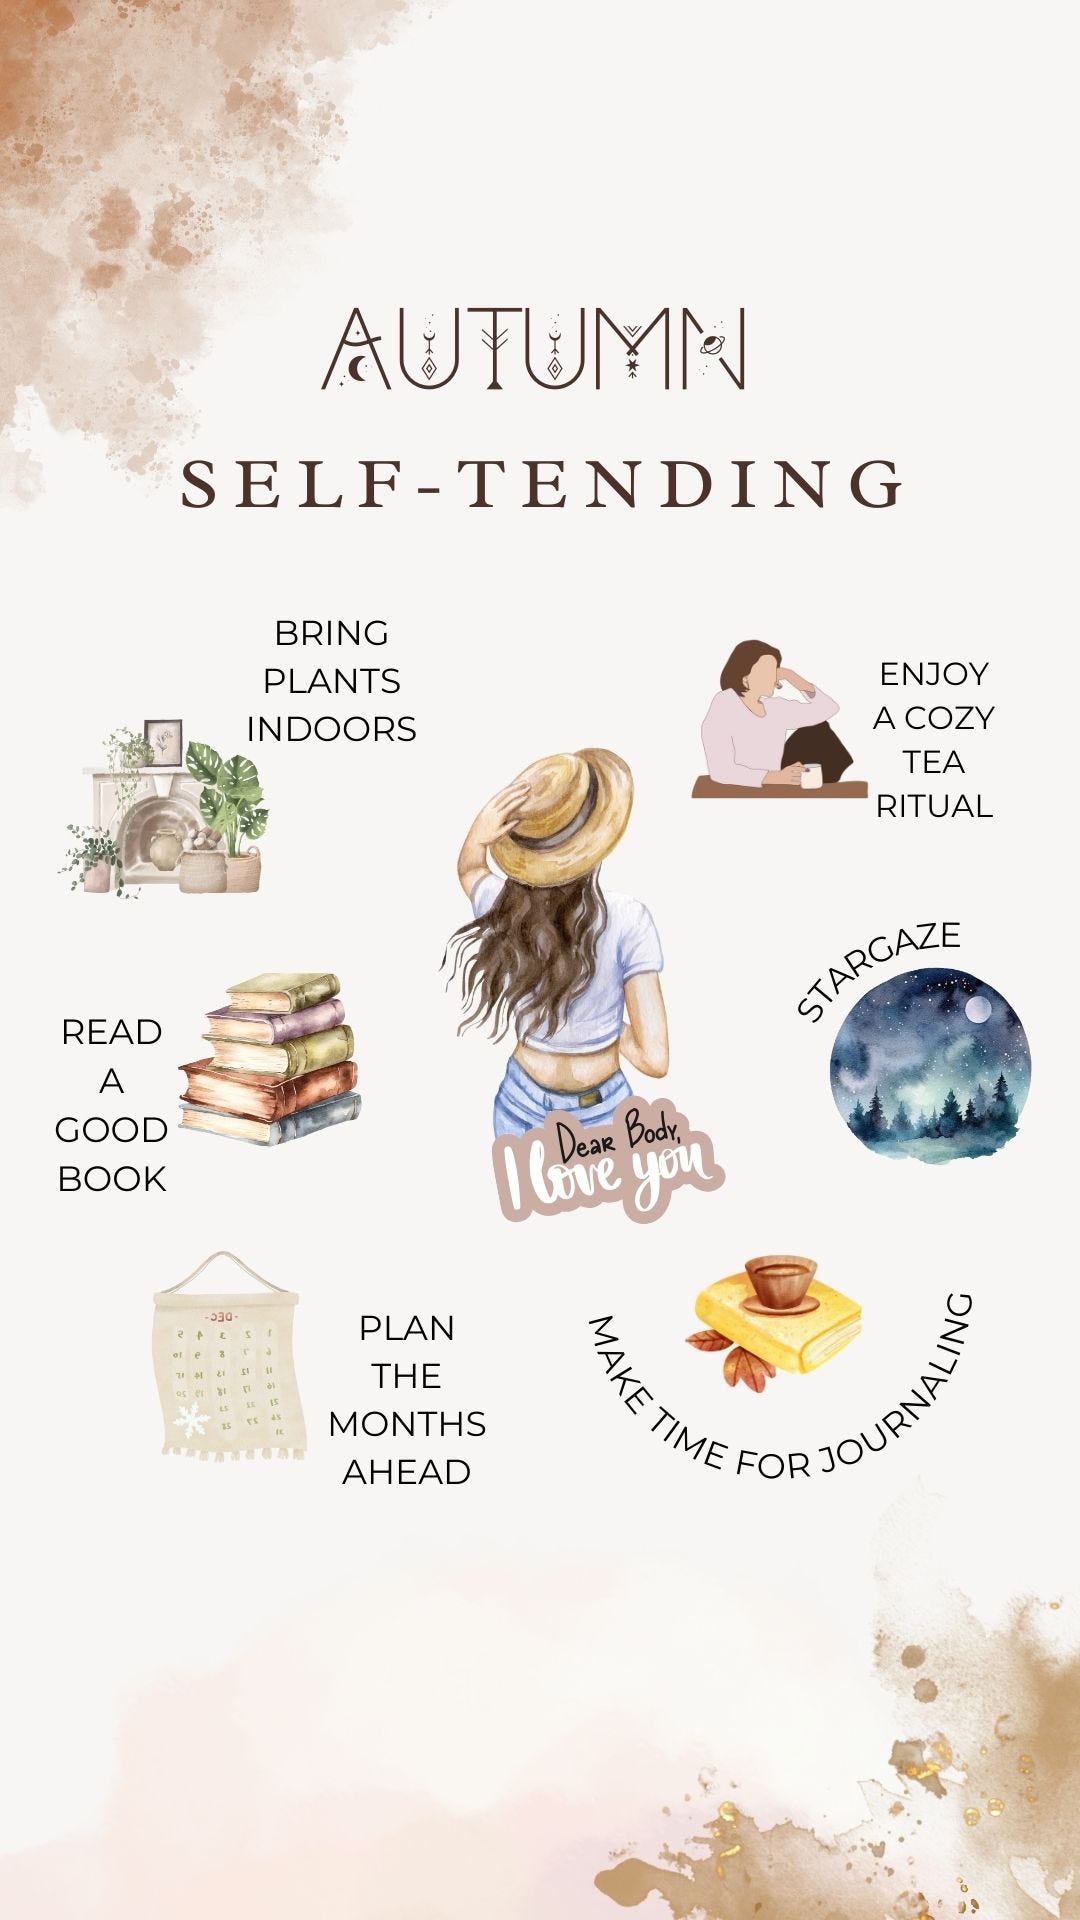 A watercolour image titled "Autumn Self-Tending"  with 6 autumn activities for self-care.  Bring plants indoors, enjoy a cozy tea, read a good book, plan the months ahead, stargaze and make time for journaling.